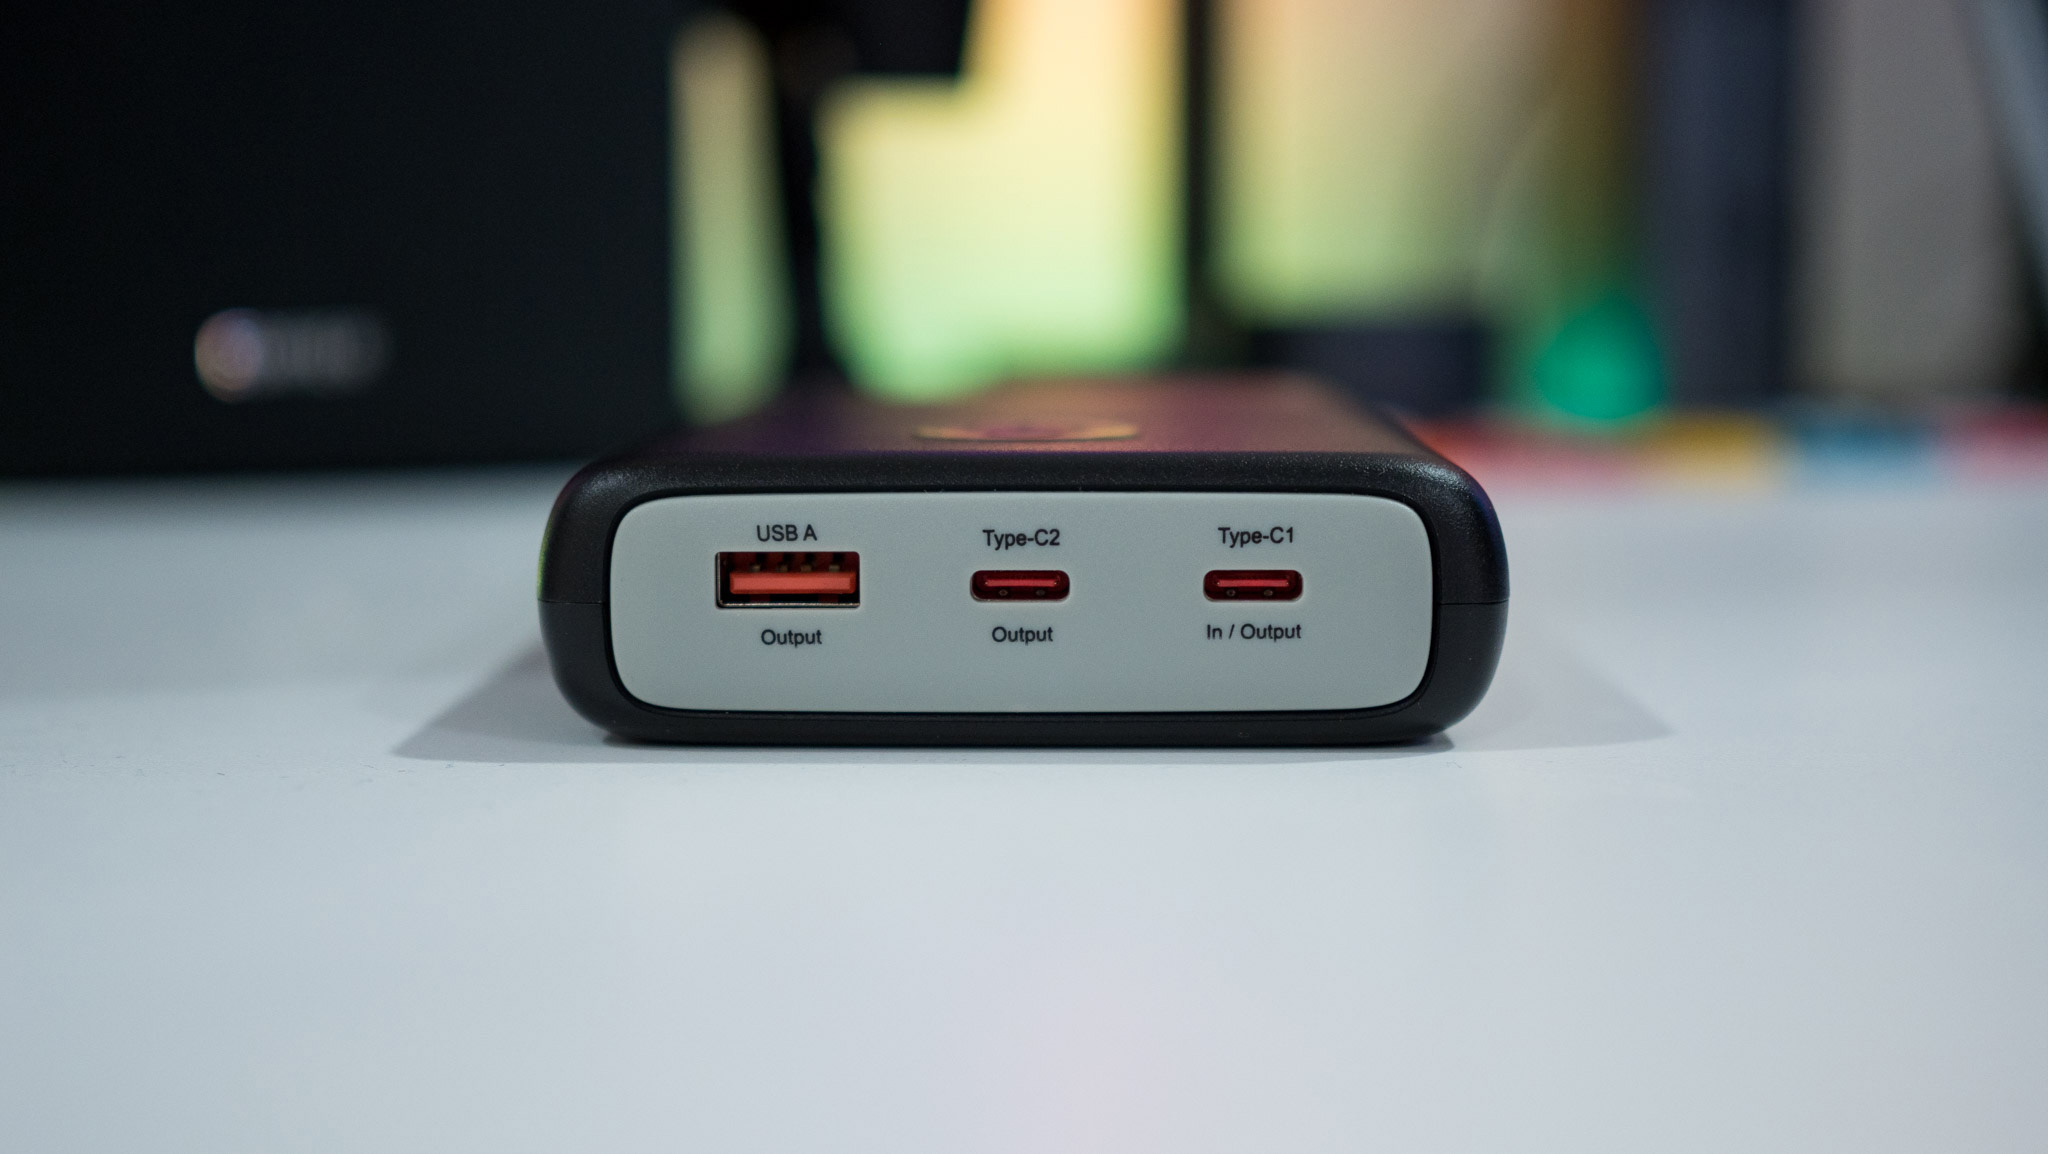 Side view of Stuffcool 85W Power Bank showing three USB ports